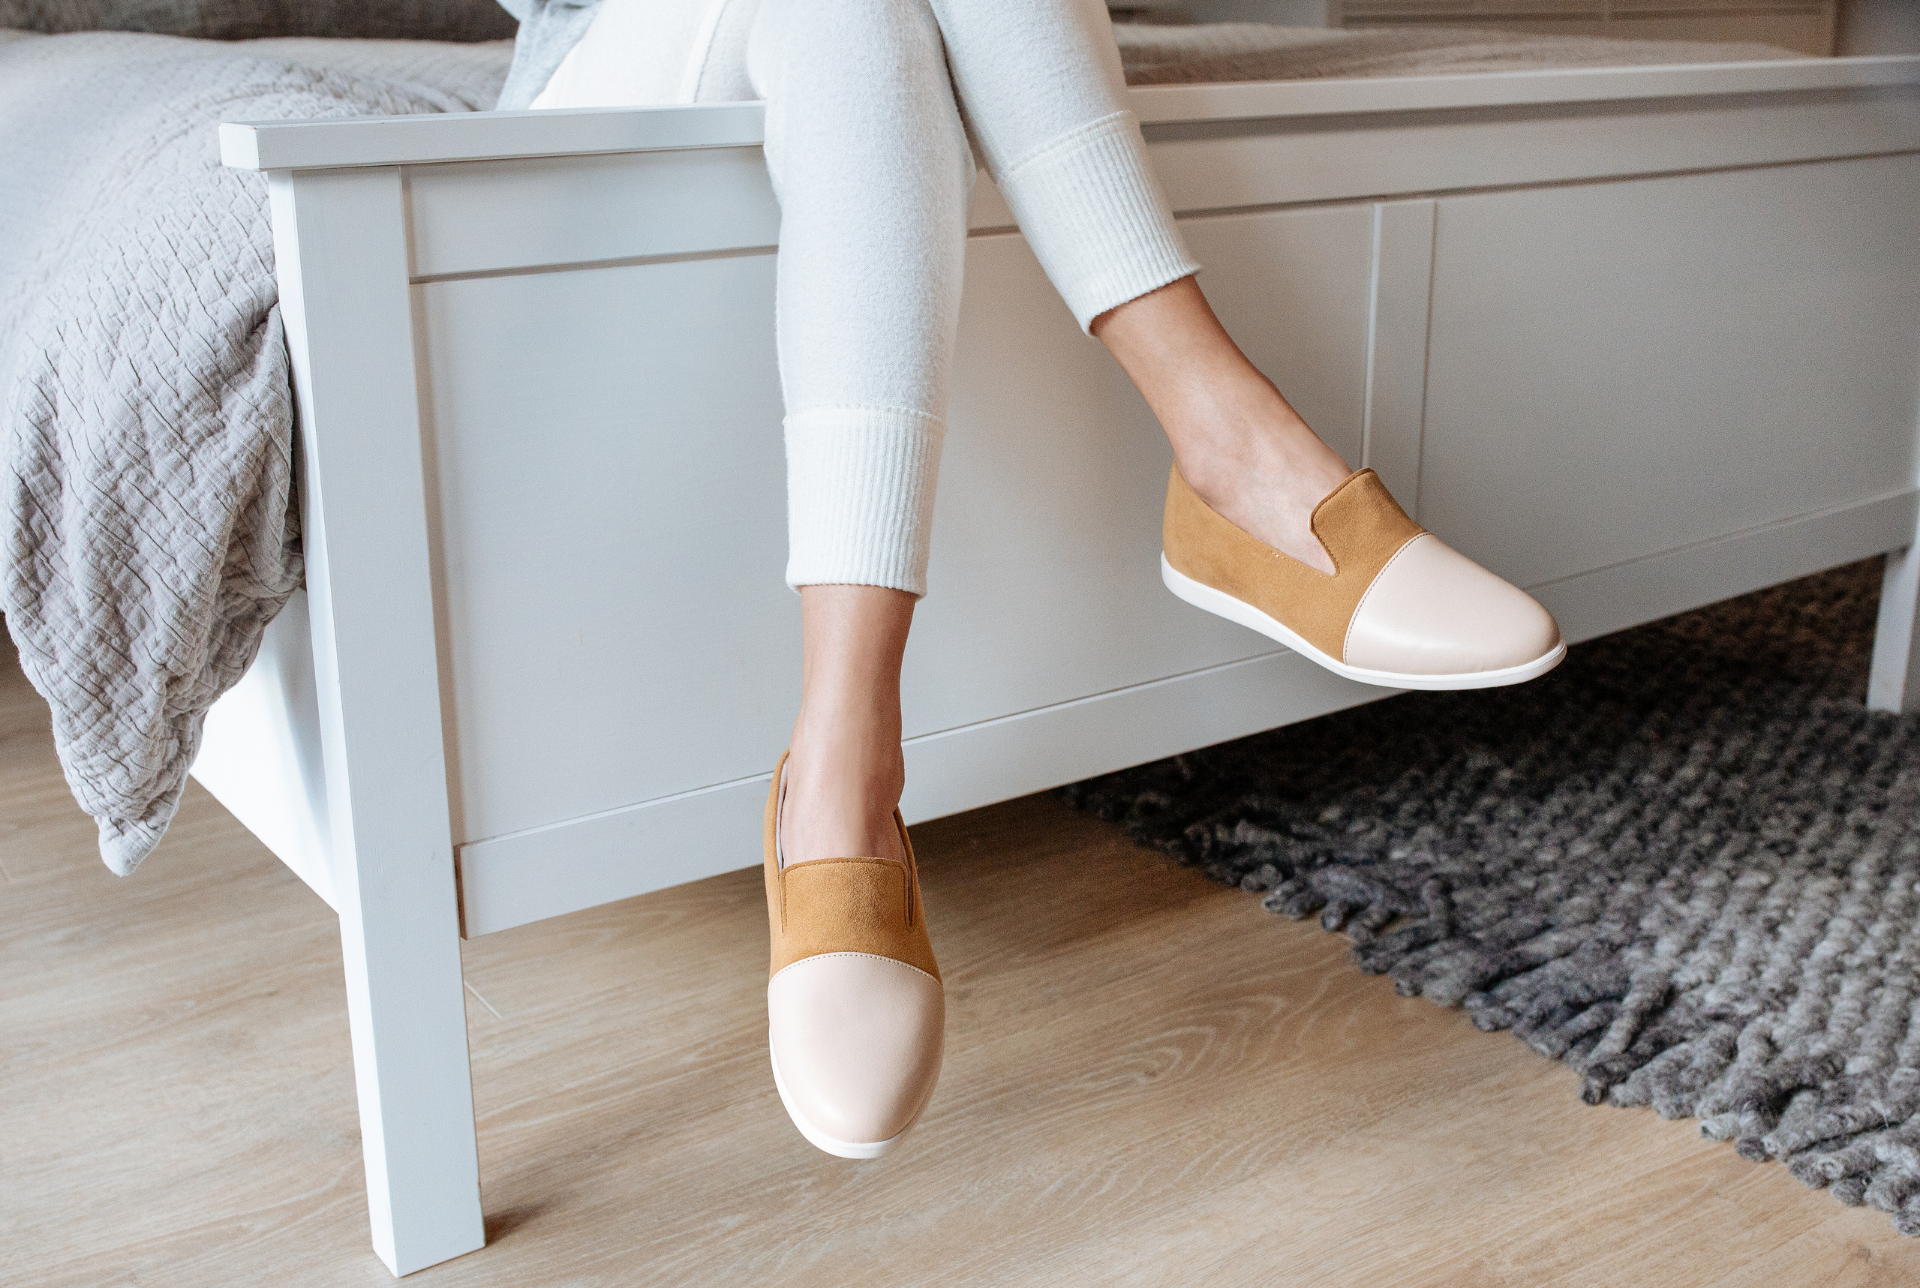 Best slippers for women - Stylish slippers to buy now